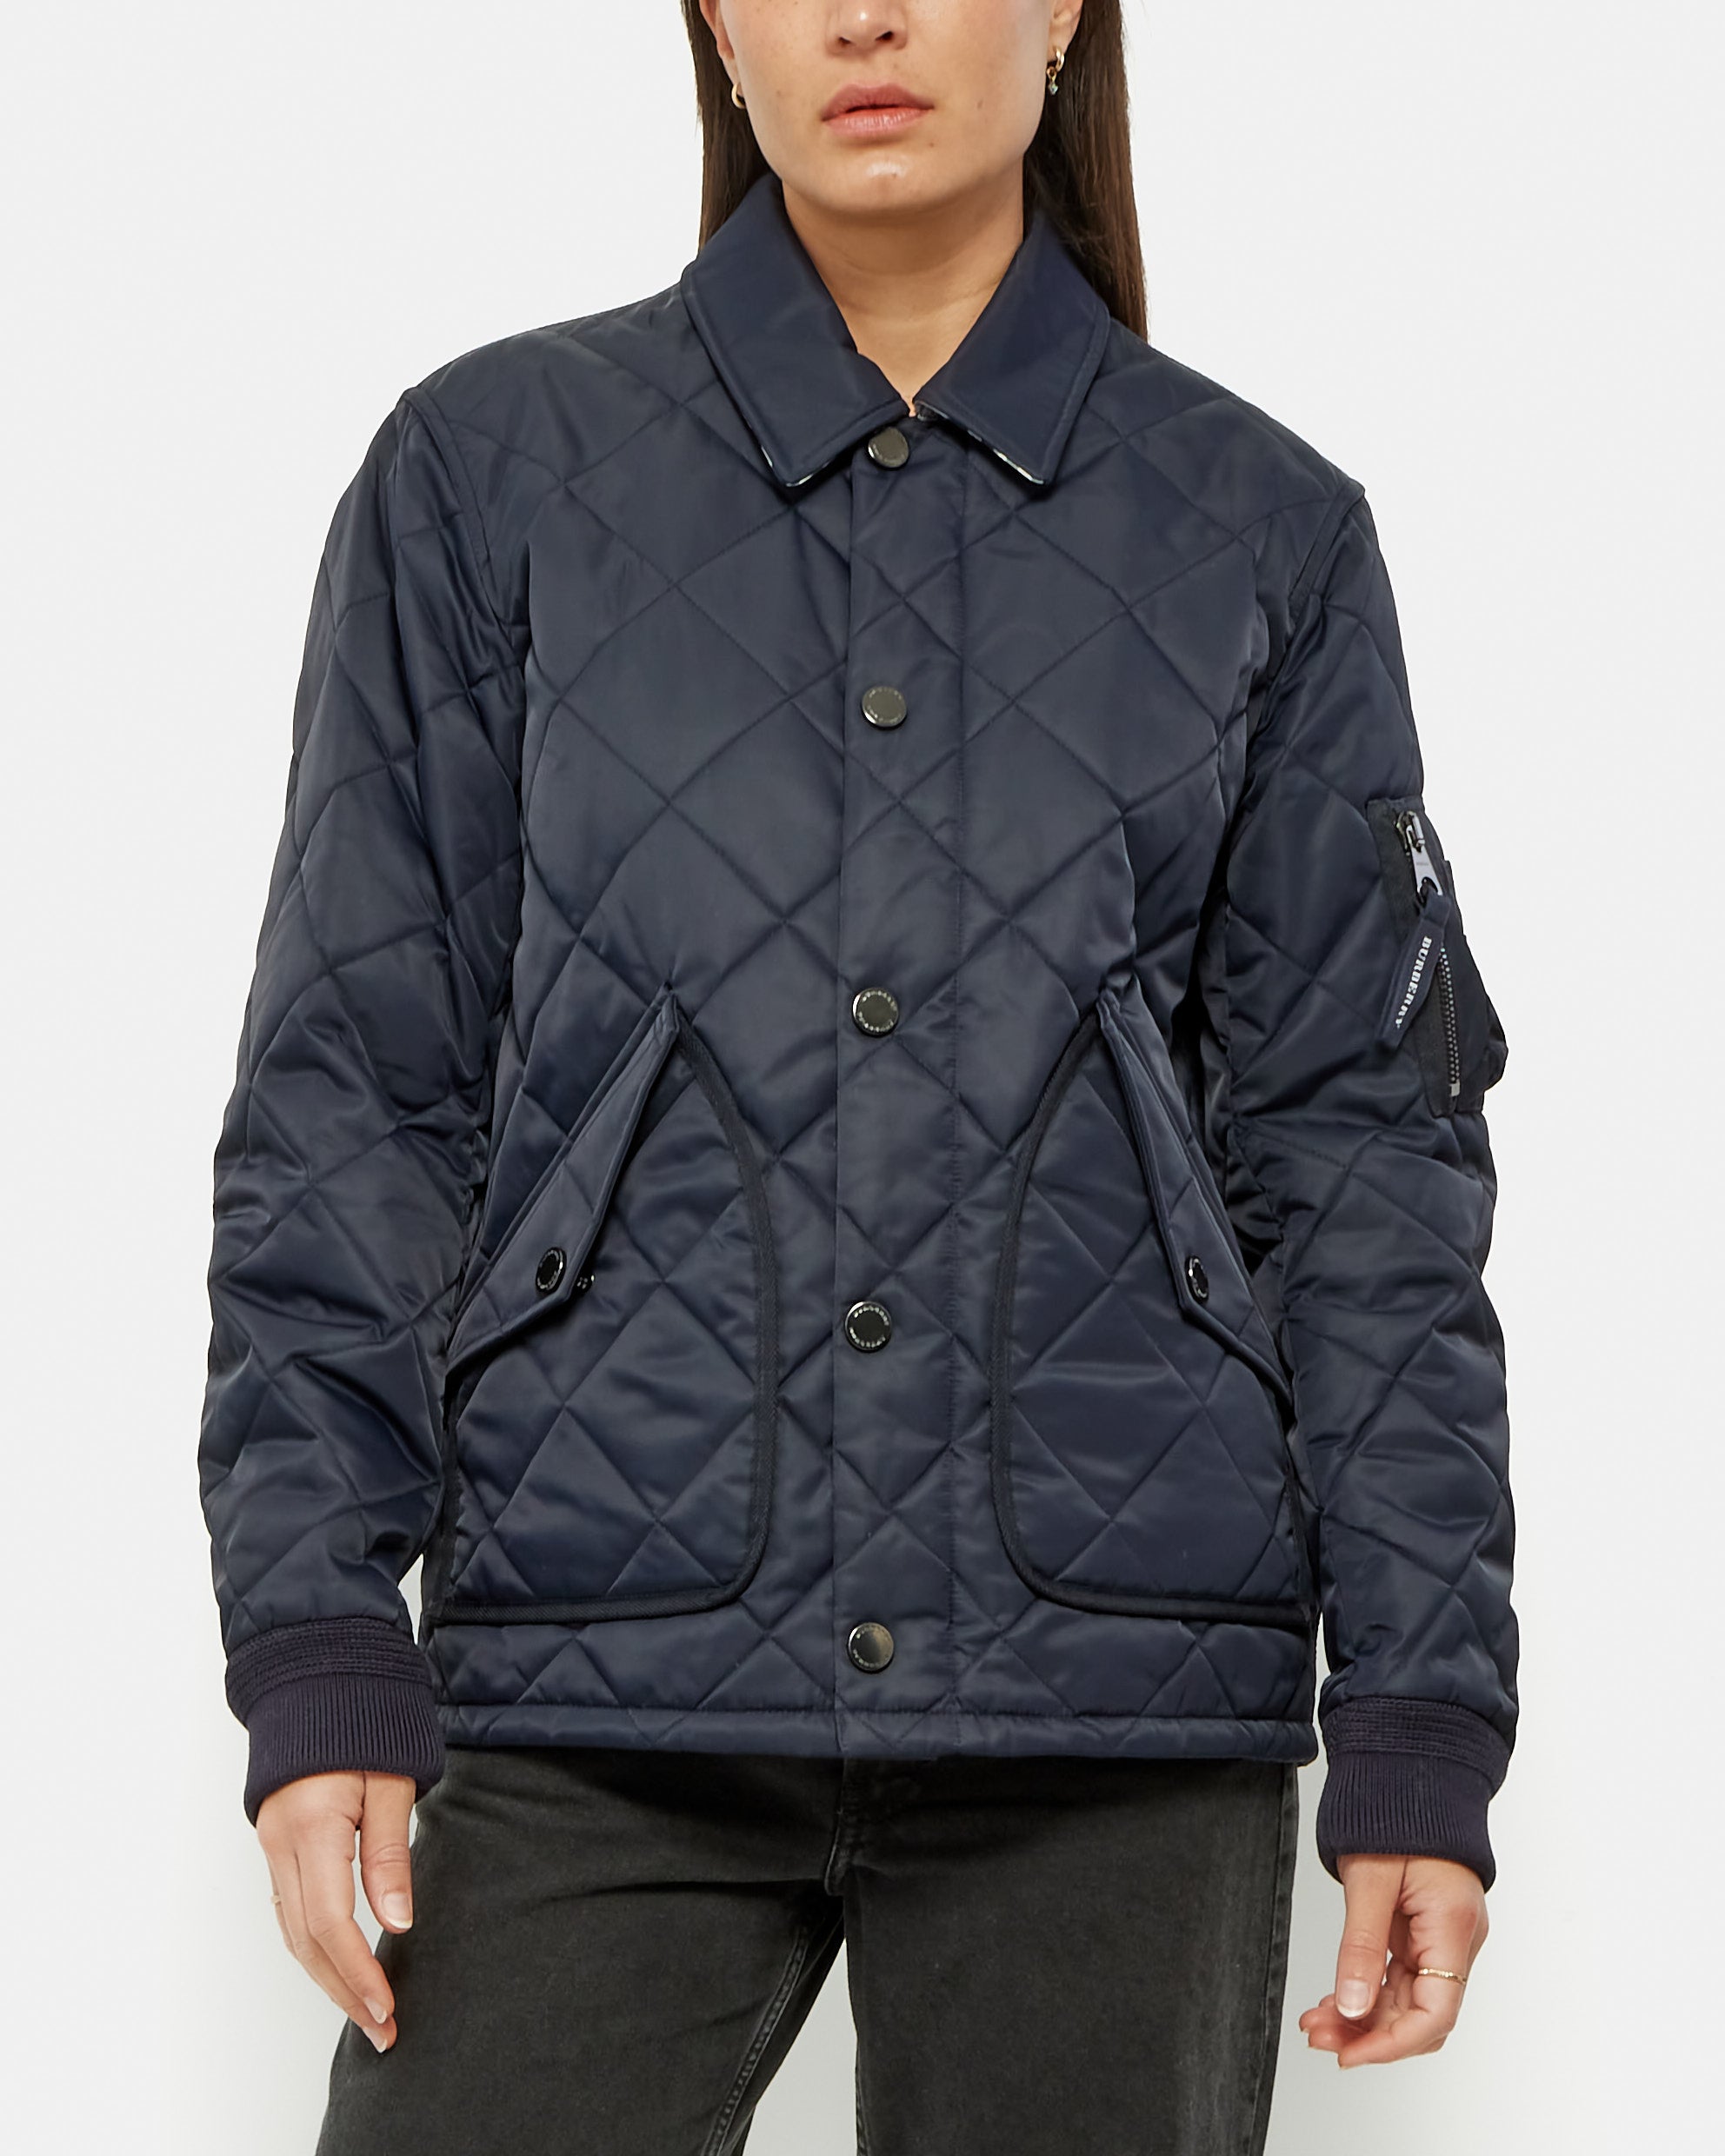 Burberry Diamond Quilted Jacket Navy